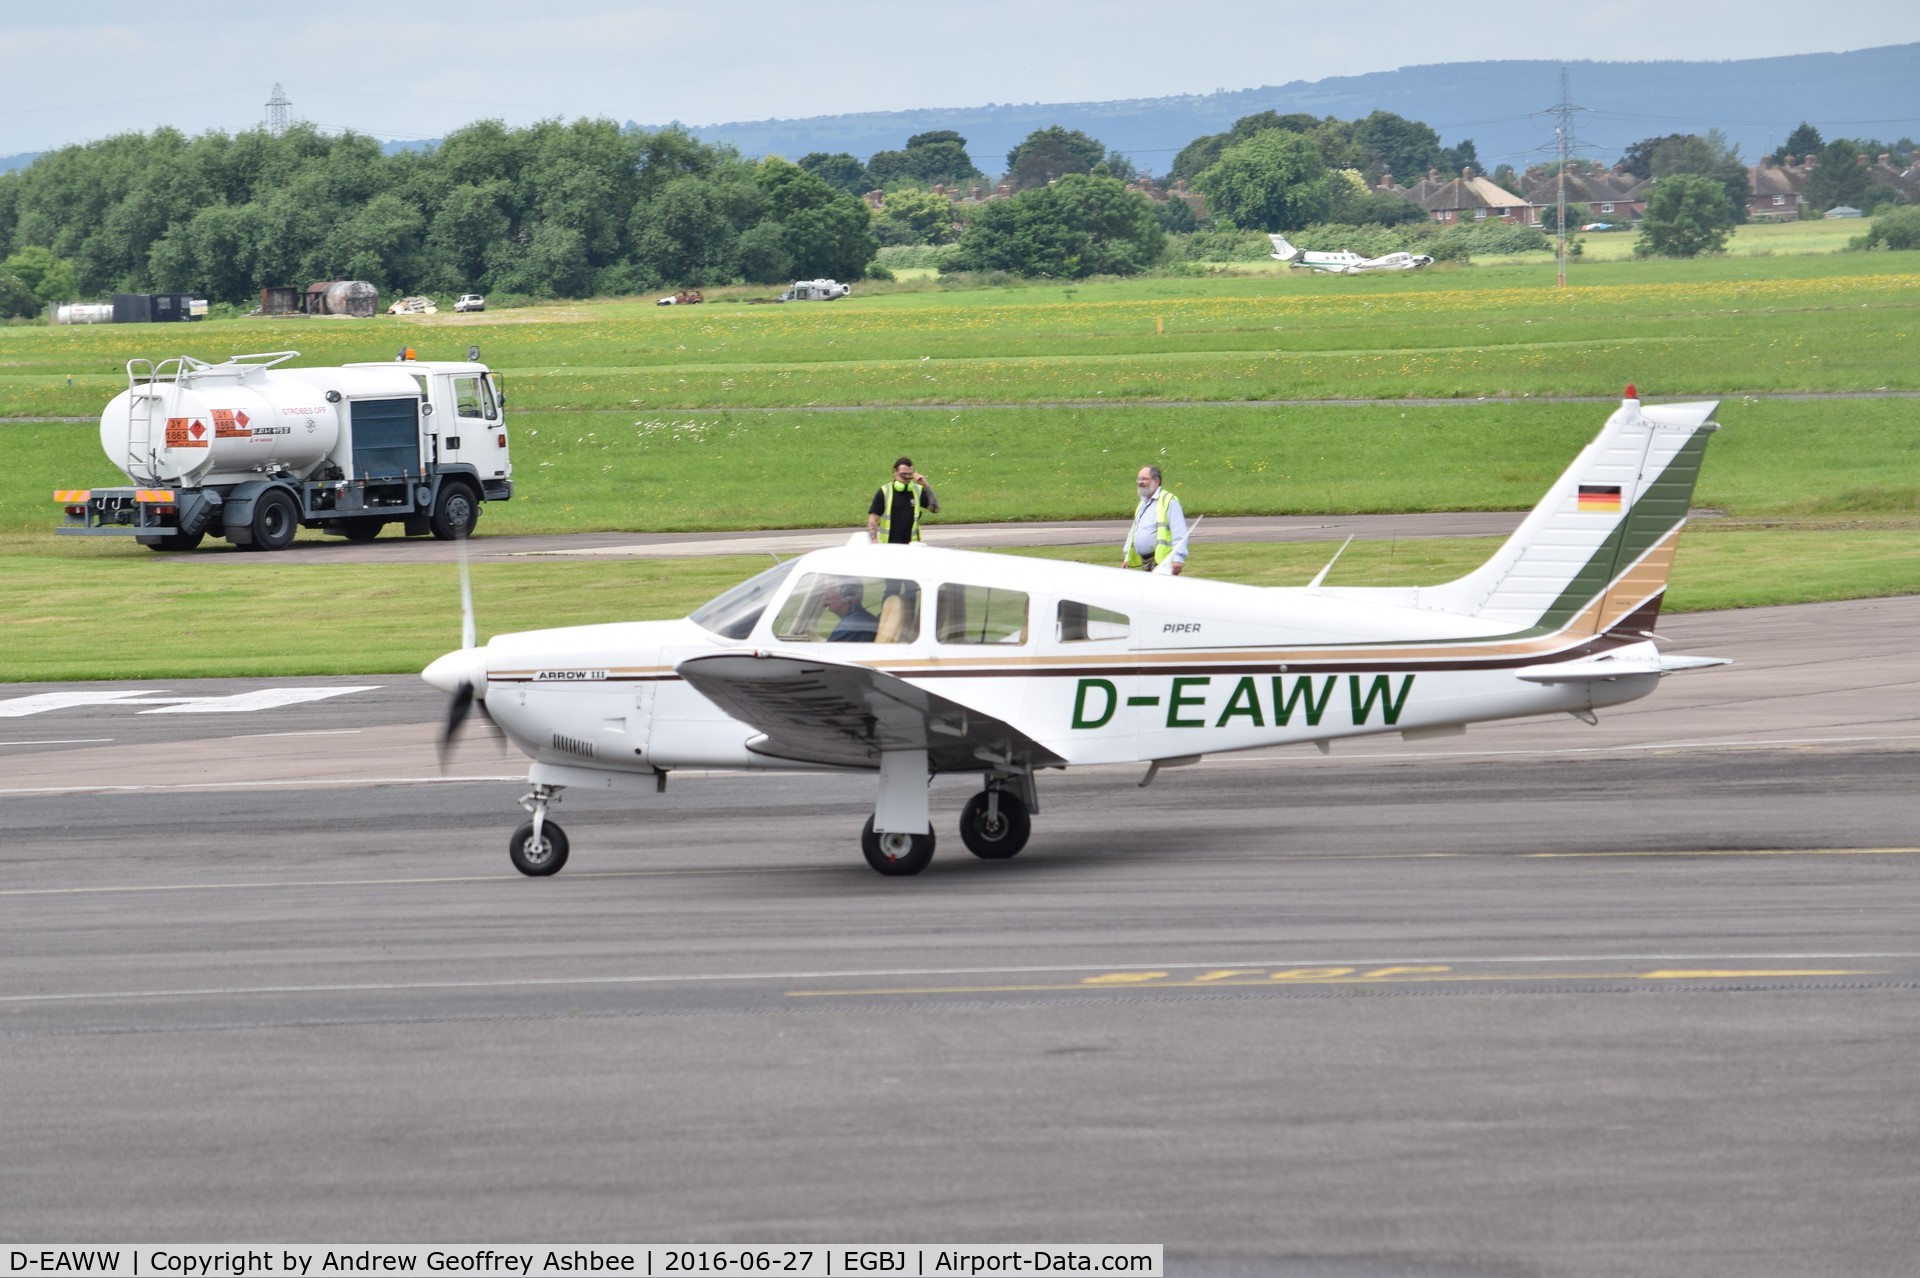 D-EAWW, 1978 Piper PA-28R-201 Cherokee Arrow III C/N 28R-7837199, D-EAWW at Gloucestershire Airport.